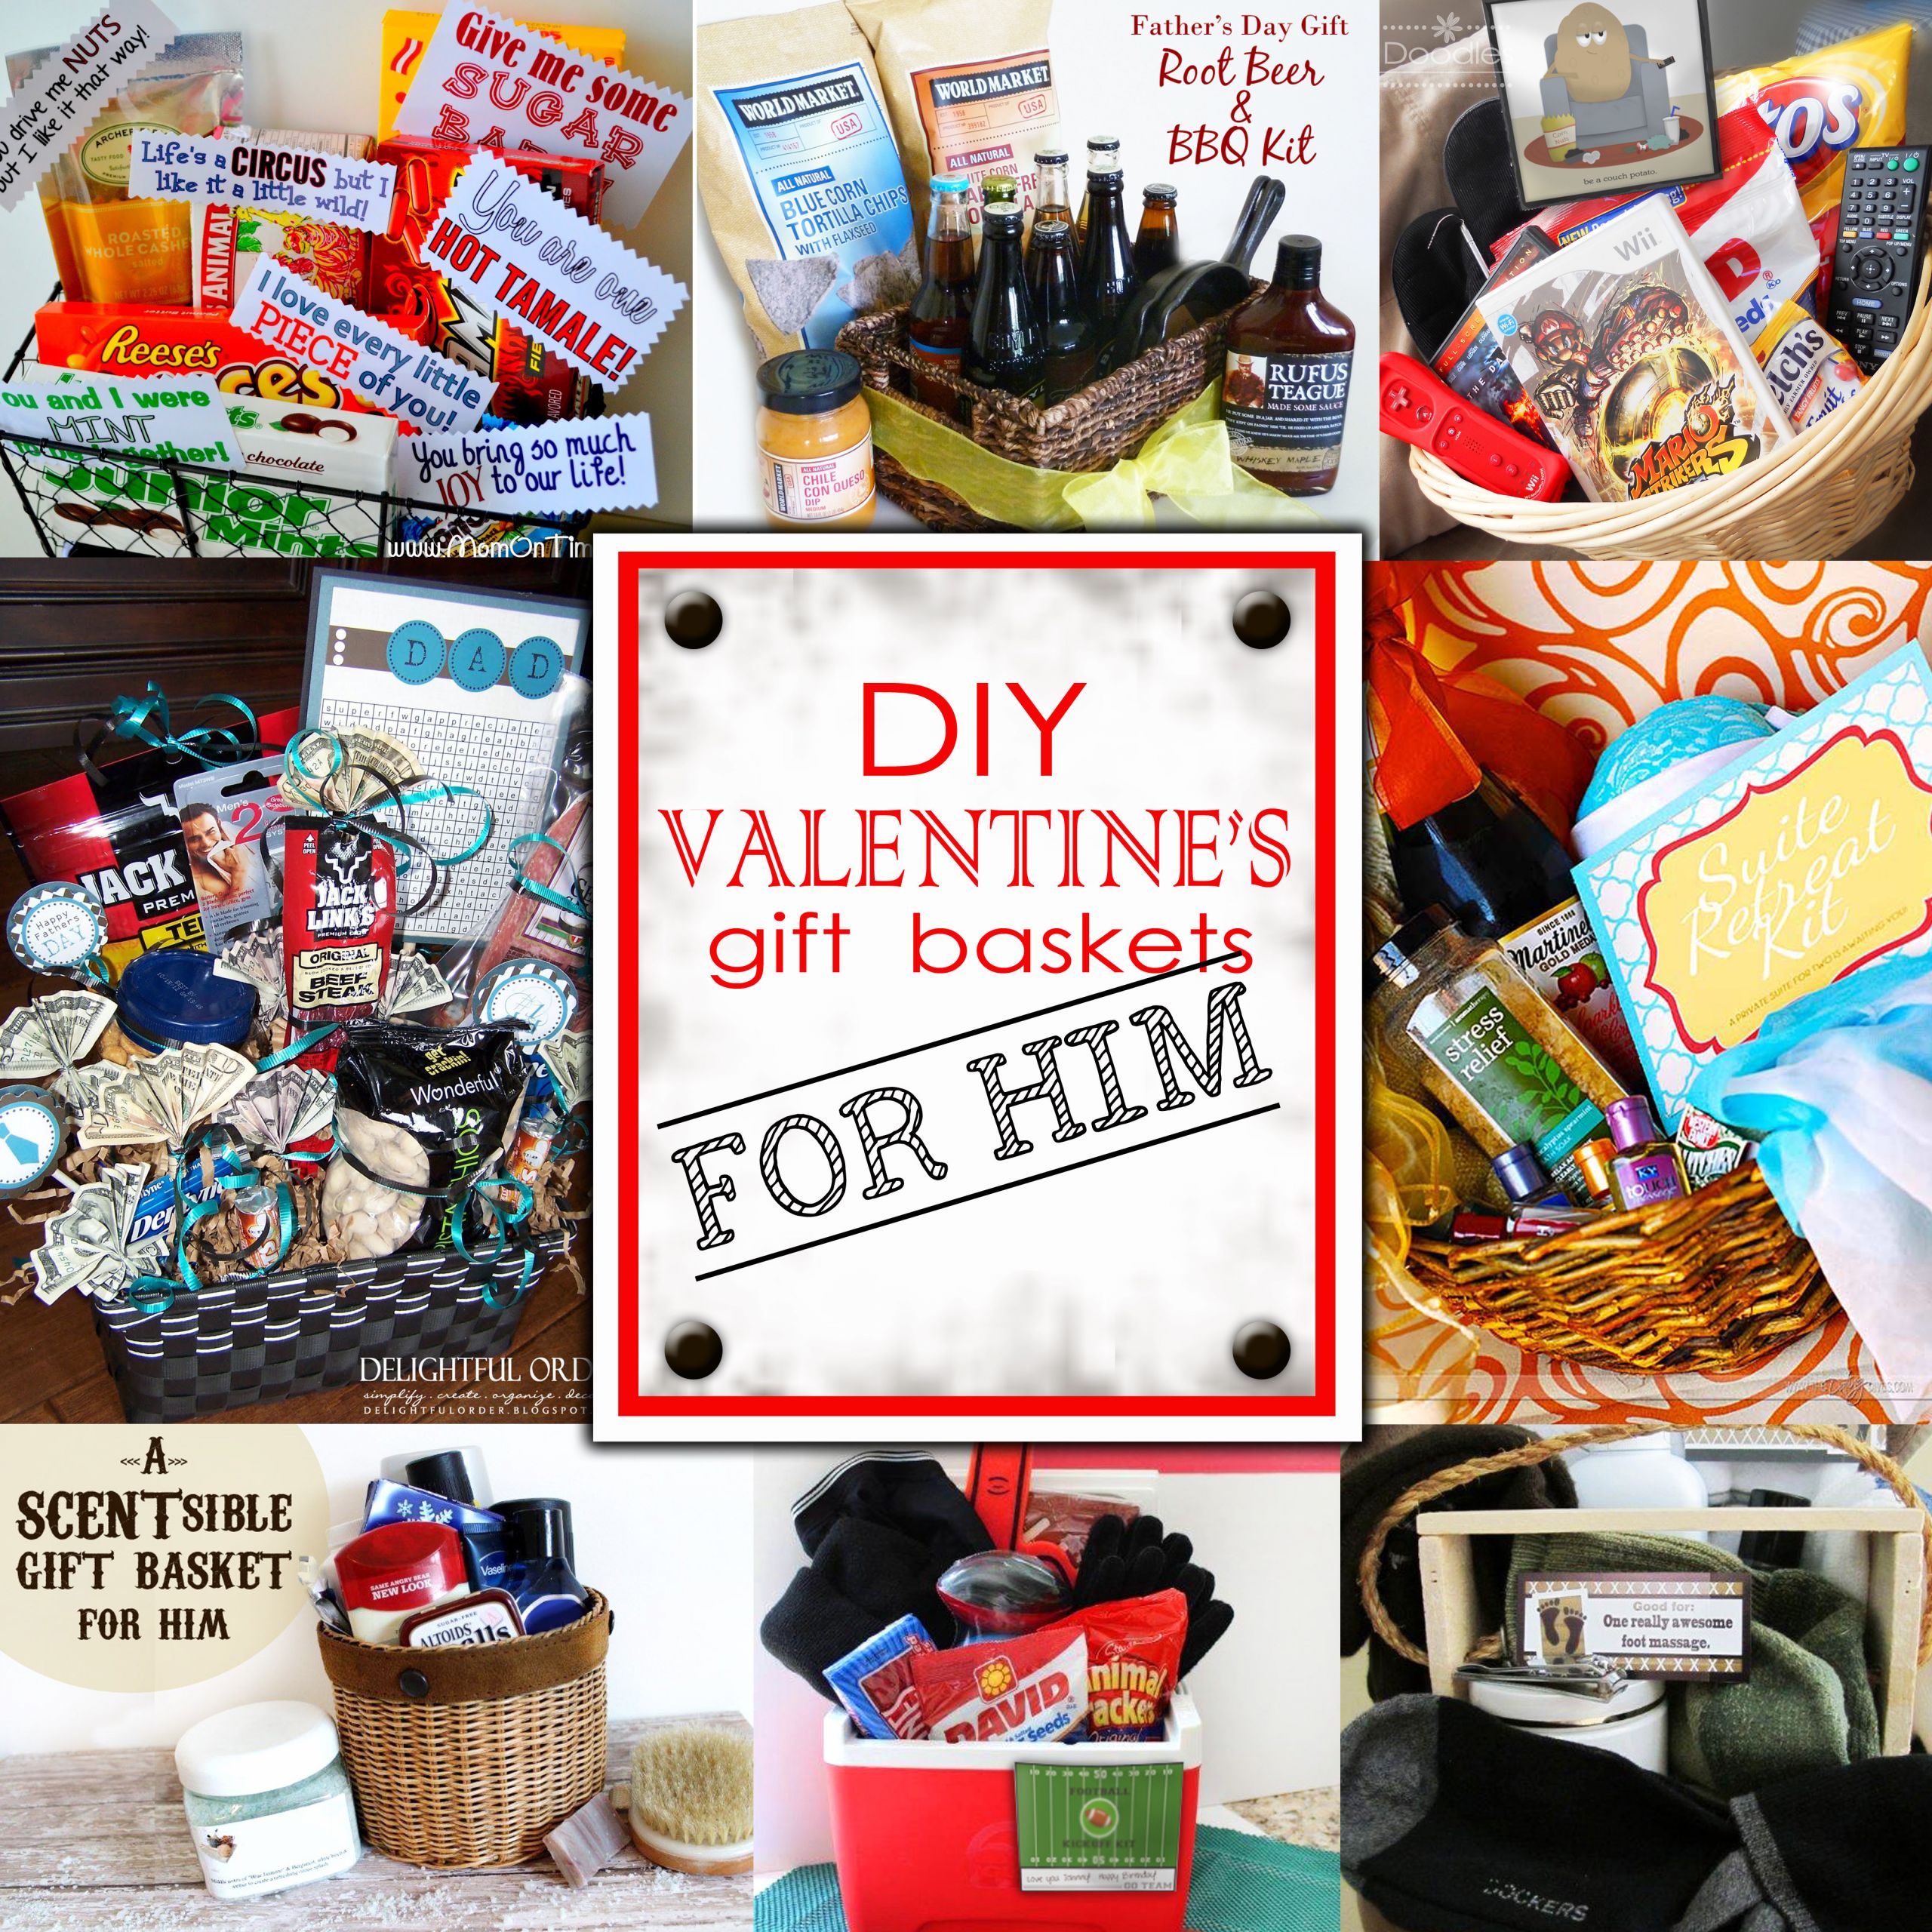 Valentines Day Ideas for Him Luxury Diy Valentine S Day Gift Baskets for Him Darling Doodles